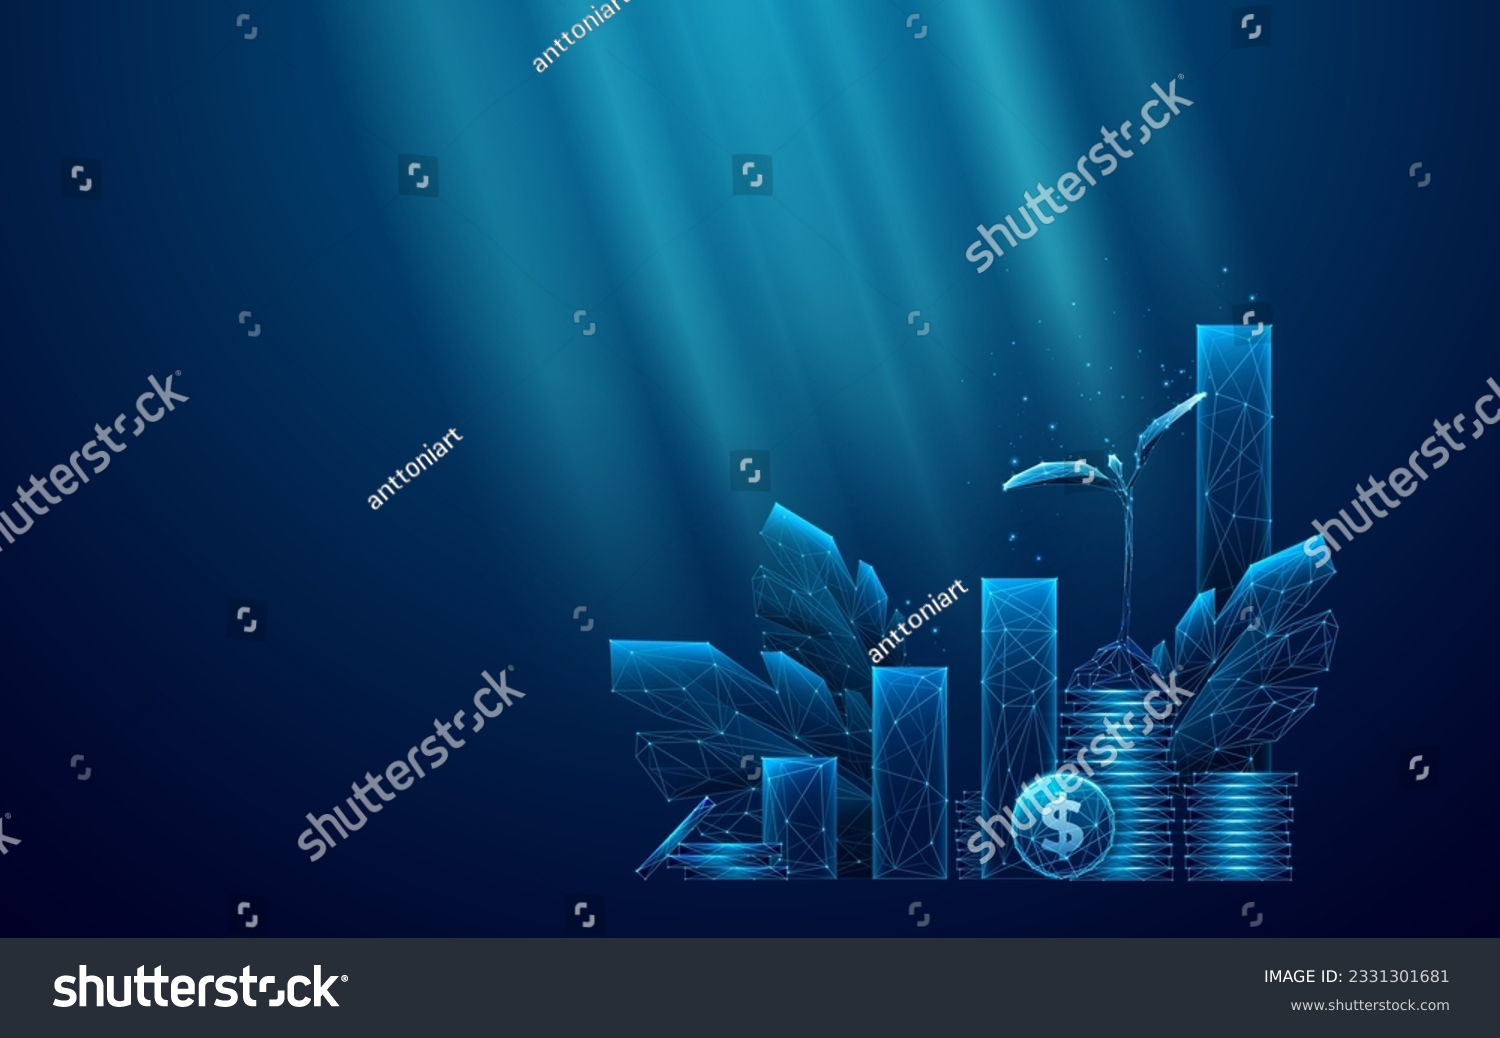 Sustainable Economy Concept. Dollar Coins, Plants, and Growth Chart in Blue on Technological Background. Abstract Finance and Environment Banner. Digital Low Poly Wireframe Vector Illustration.
 #2331301681